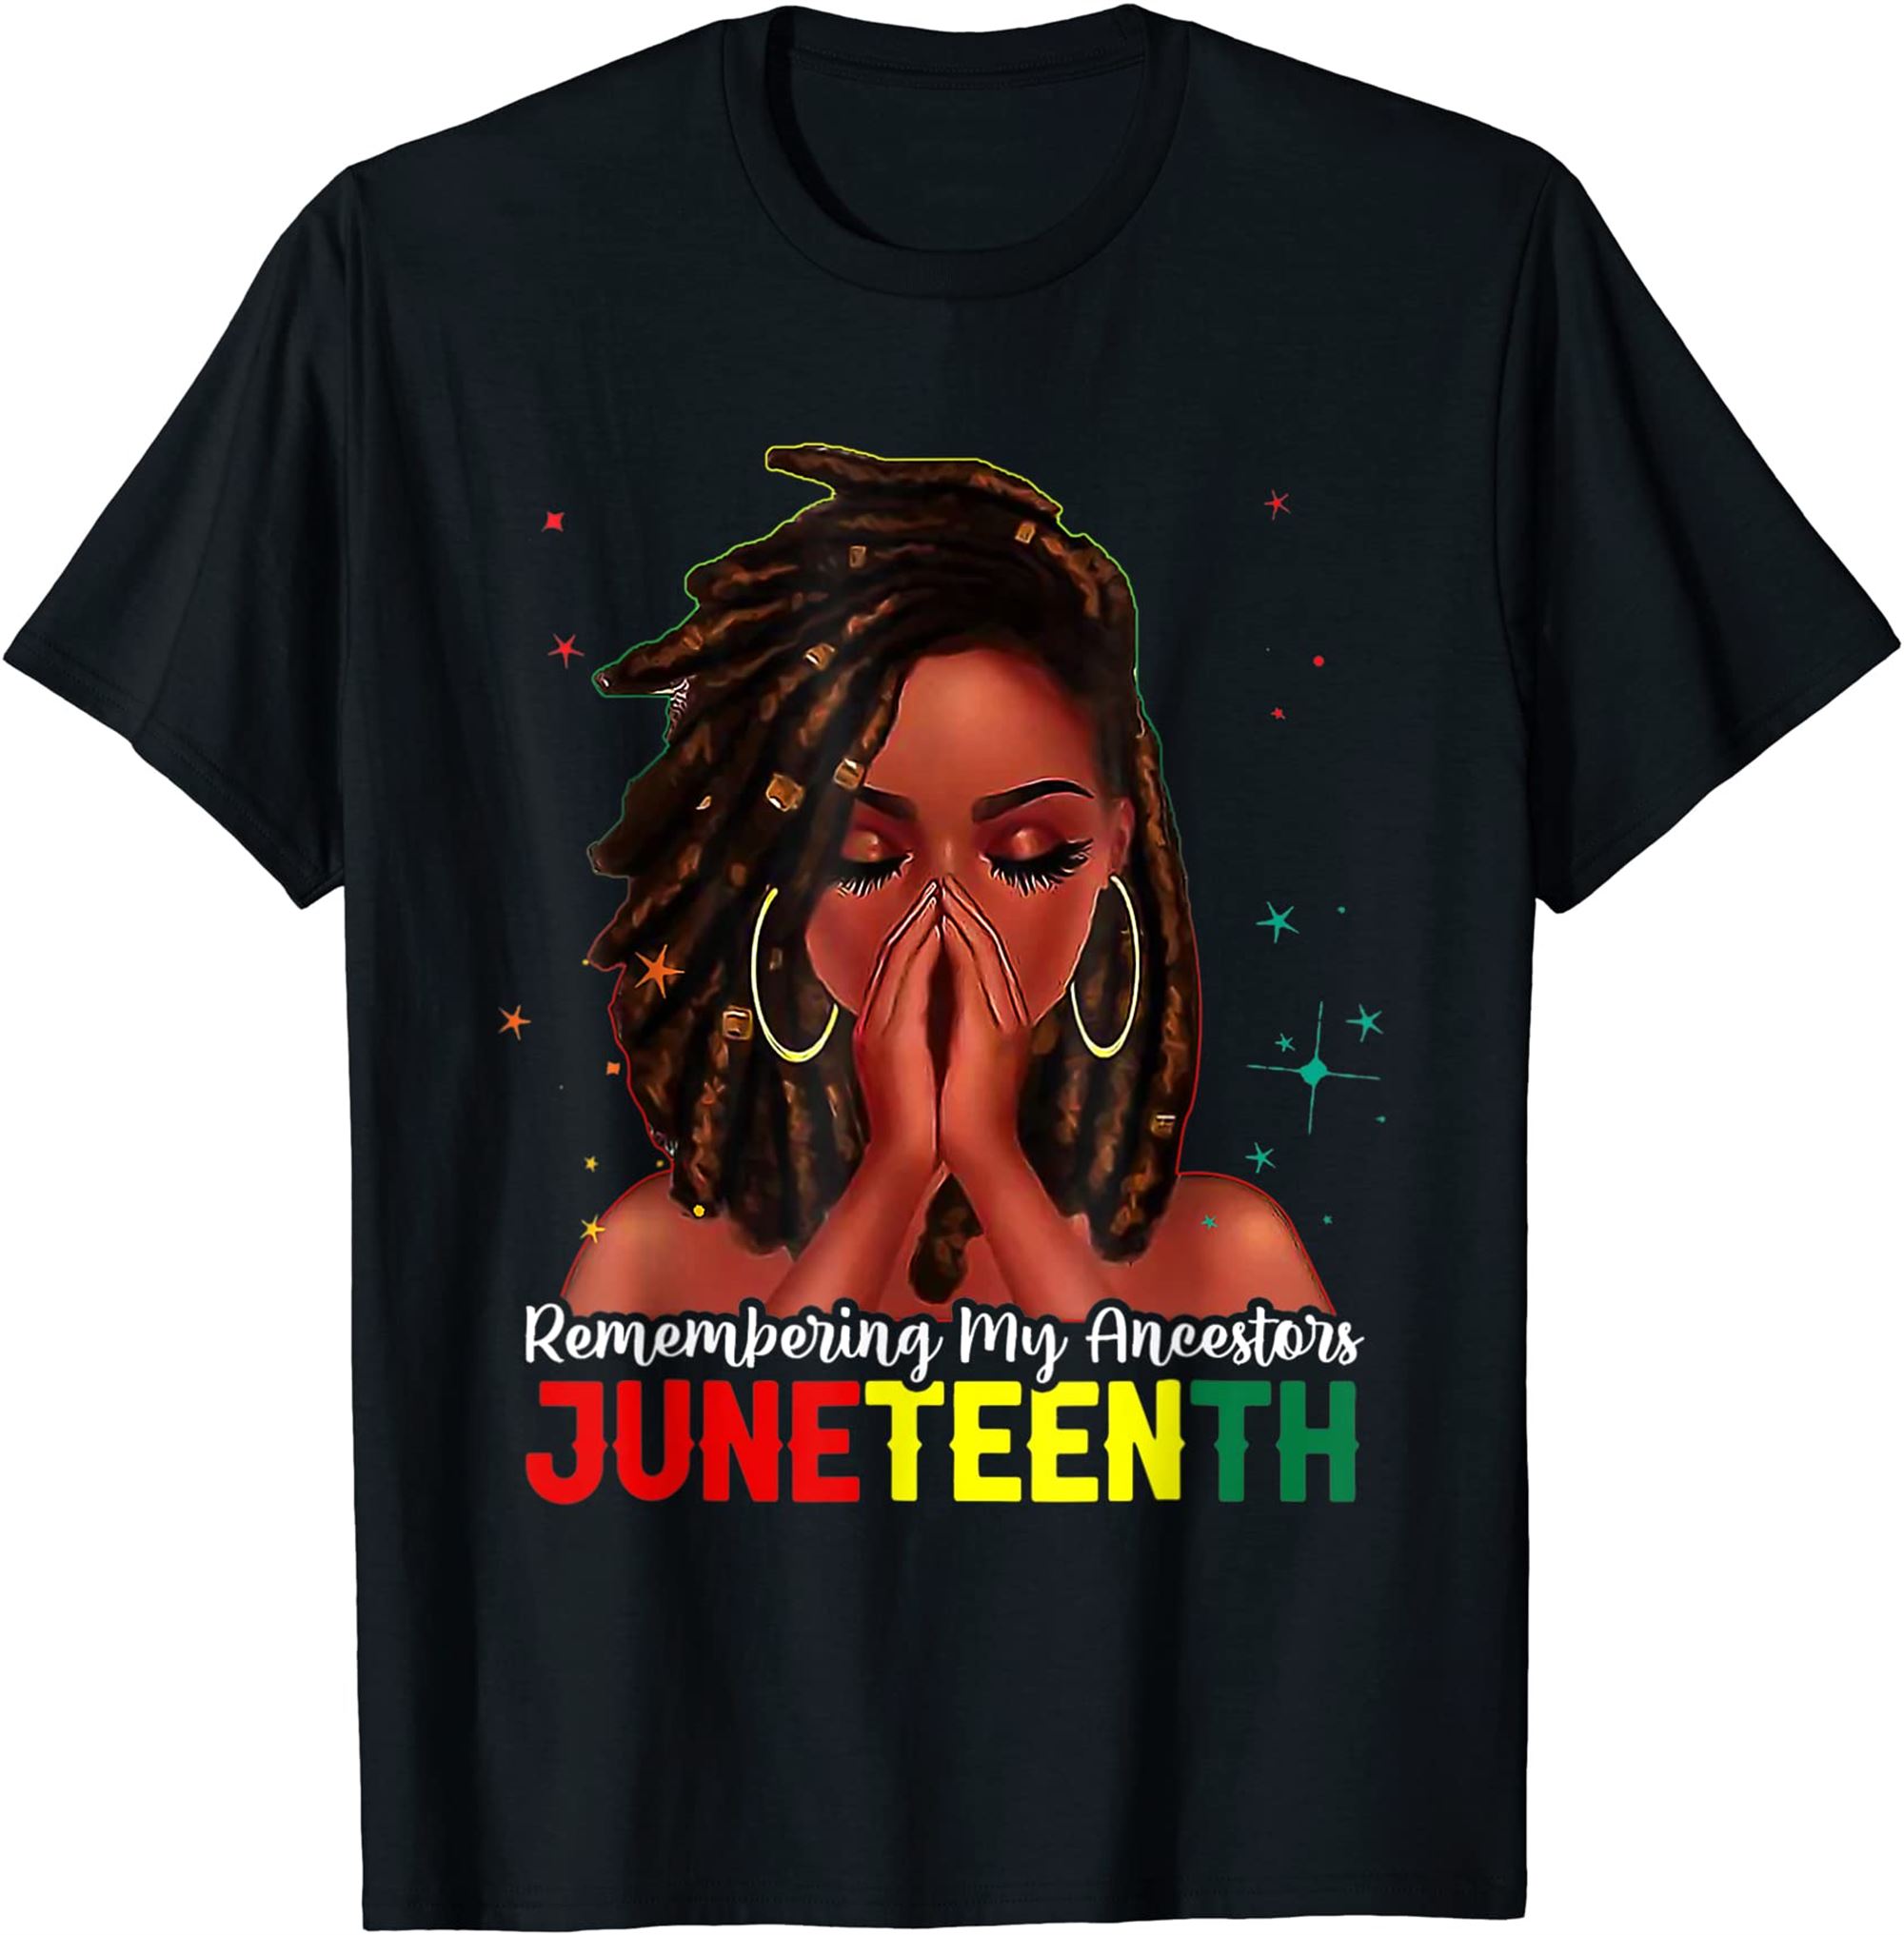 Locd Hair Black Woman Remembering My Ancestors Juneteenth T-shirt Full Size Up To 5xl